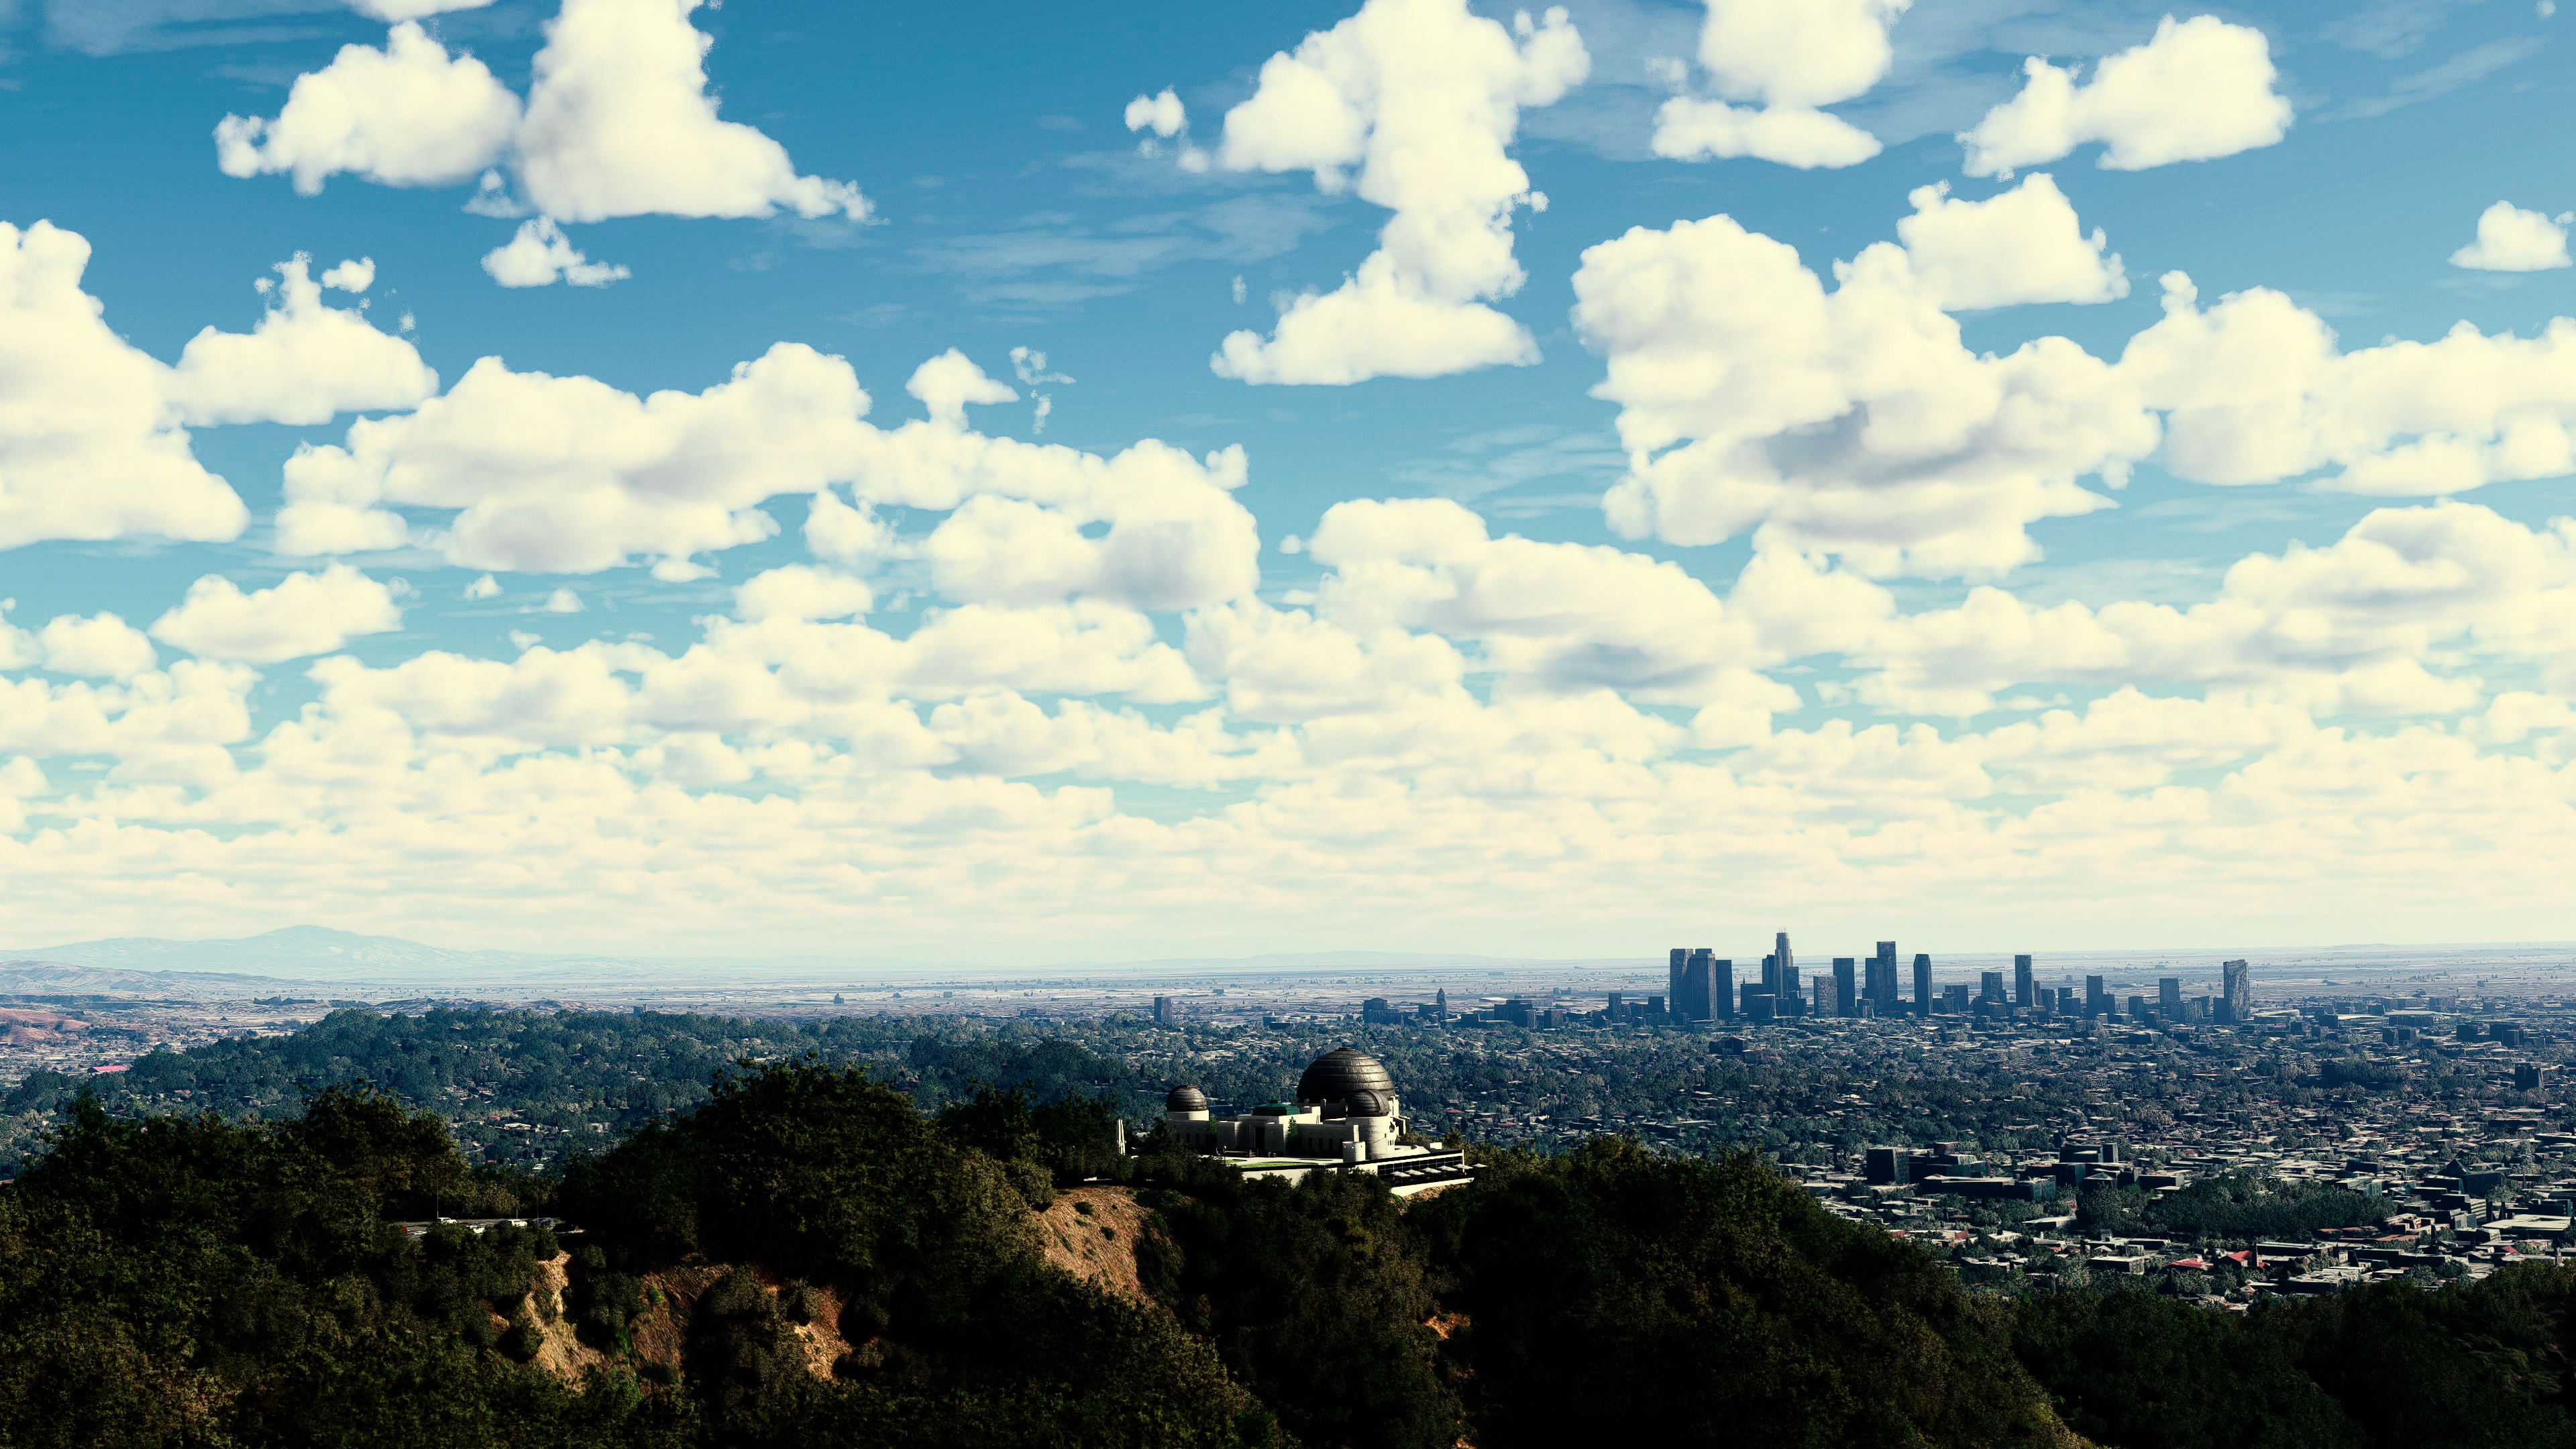 Griffith Observatory Flight Simulator City Sunset Los Angeles Sky Clouds Cityscape Video Games 3840x2160